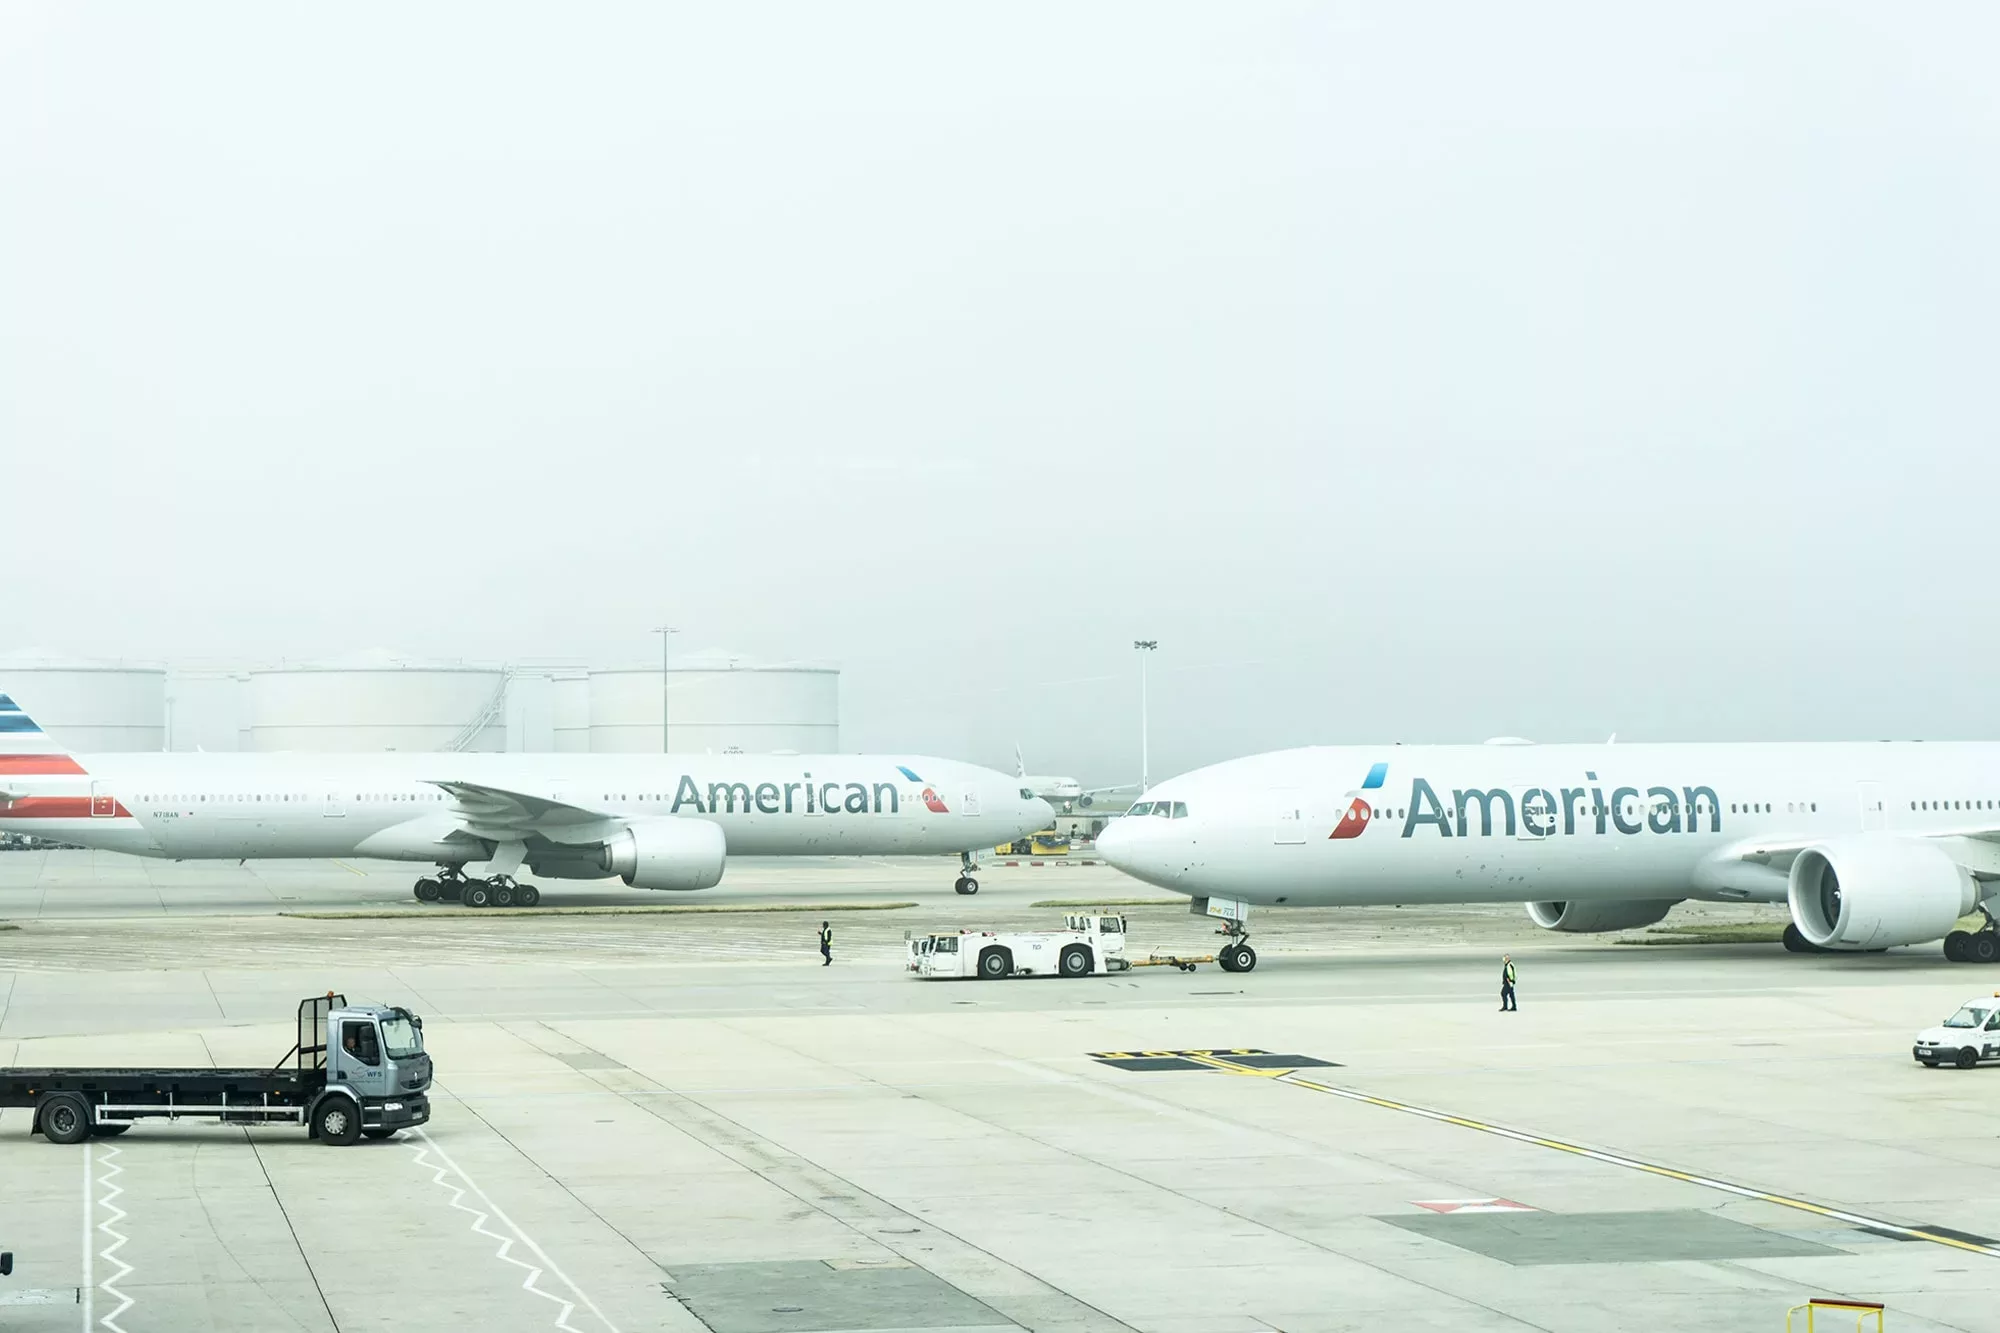 Business Extra: Complete Guide To The Business Rewards Program from American Airlines